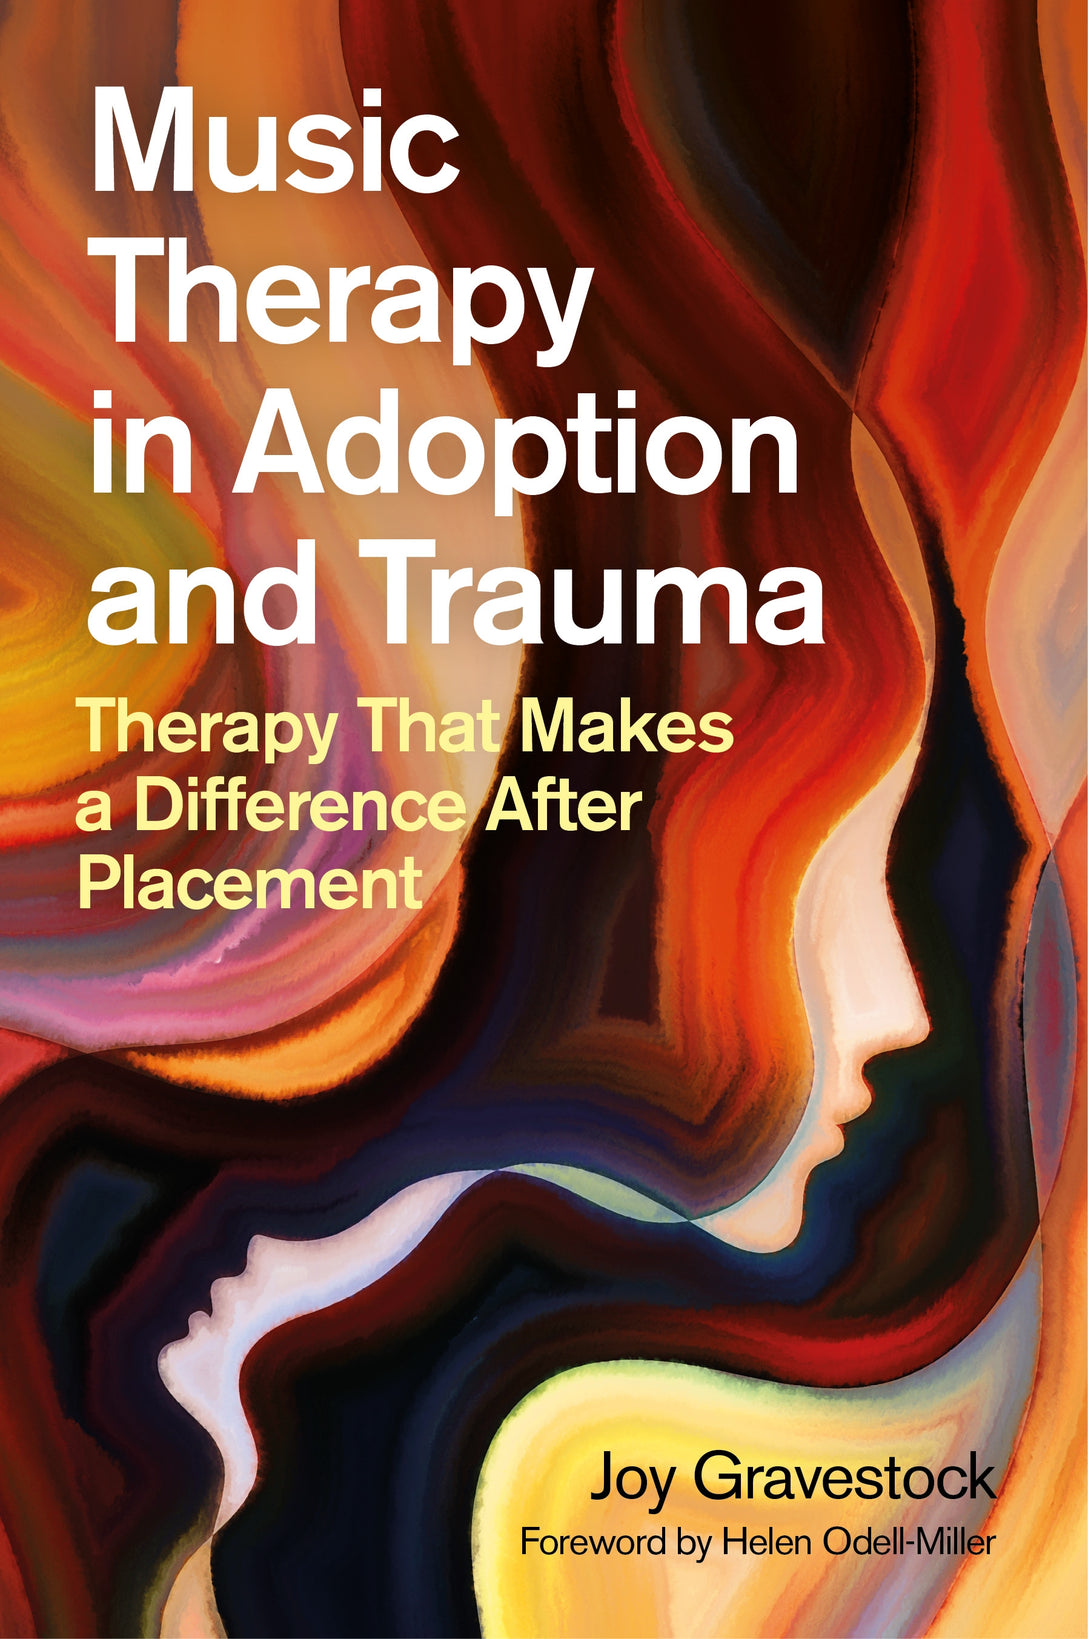 Music Therapy in Adoption and Trauma by Joy Gravestock